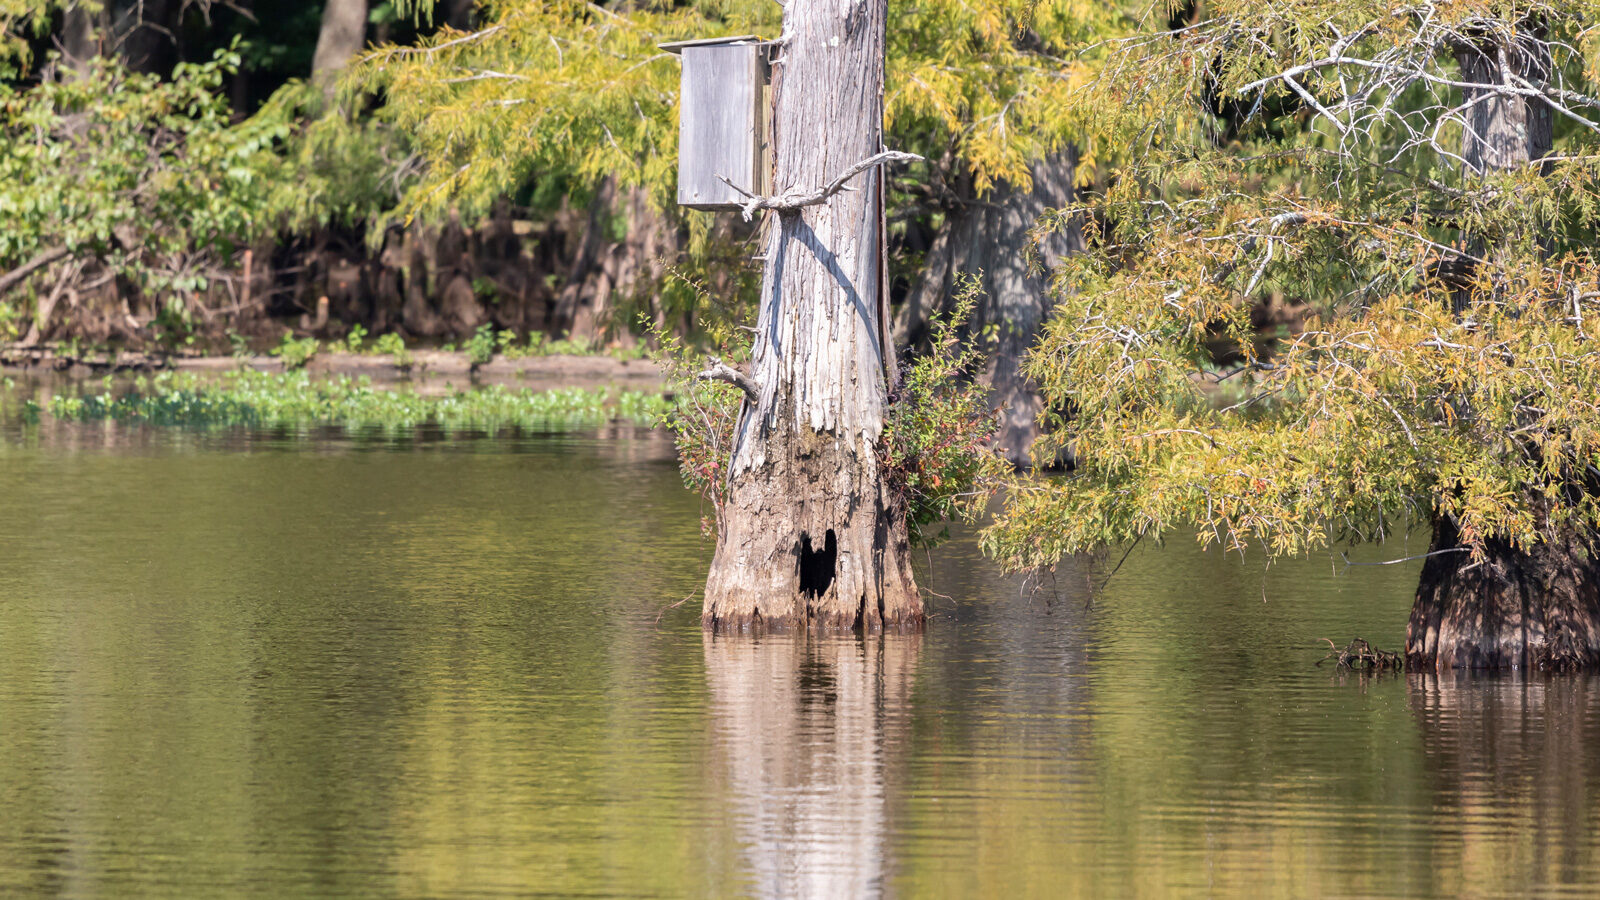 Wood duck nesting box attached to a tree over water